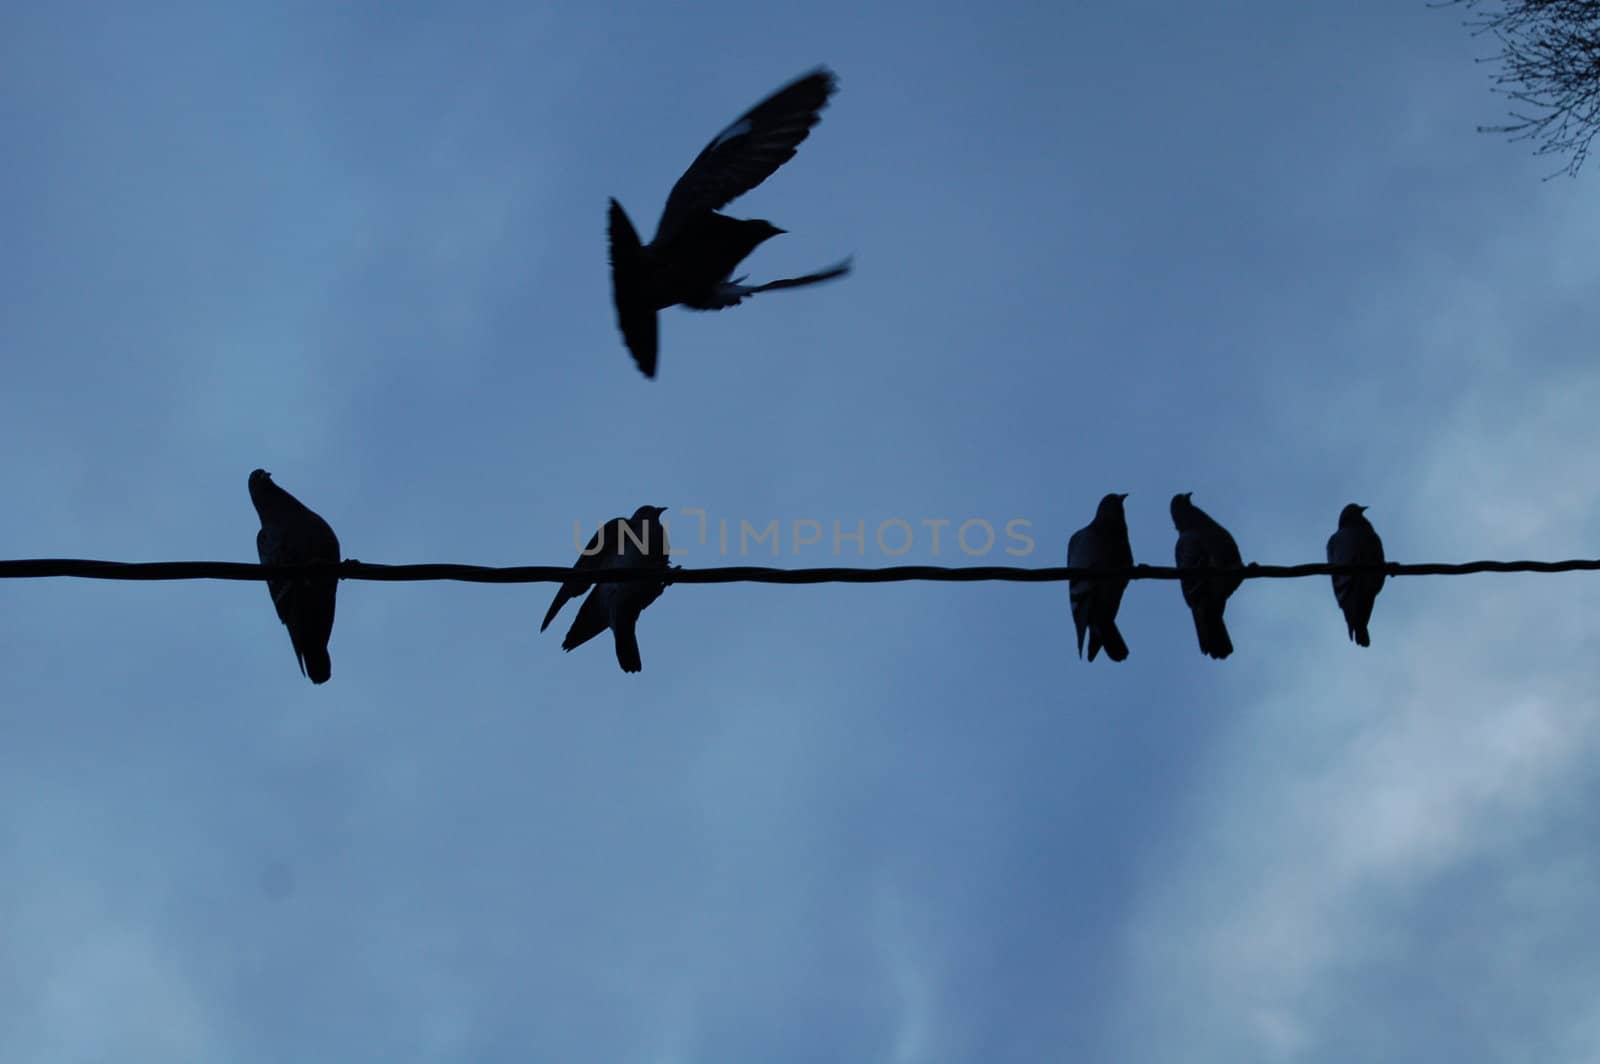 doves on a wire3 by mojly